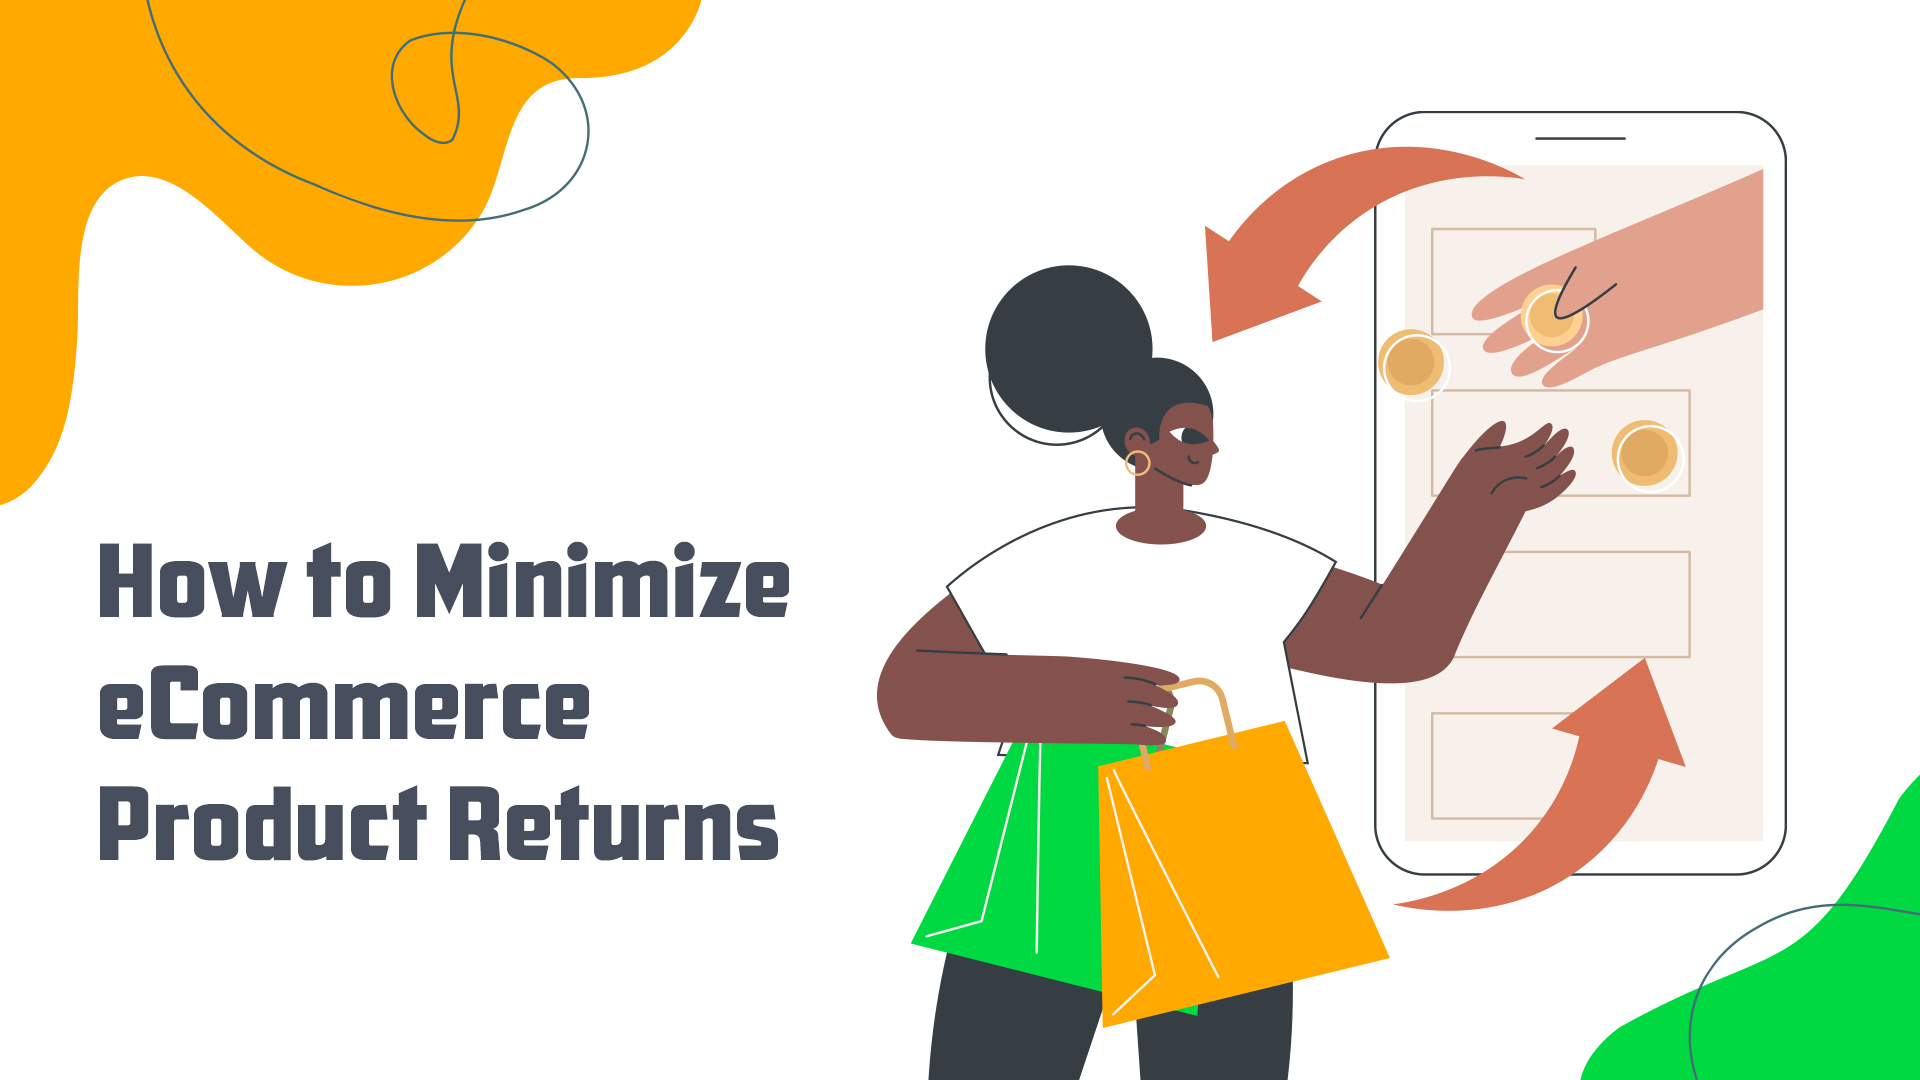 How to Reduce Ecommerce Product Returns